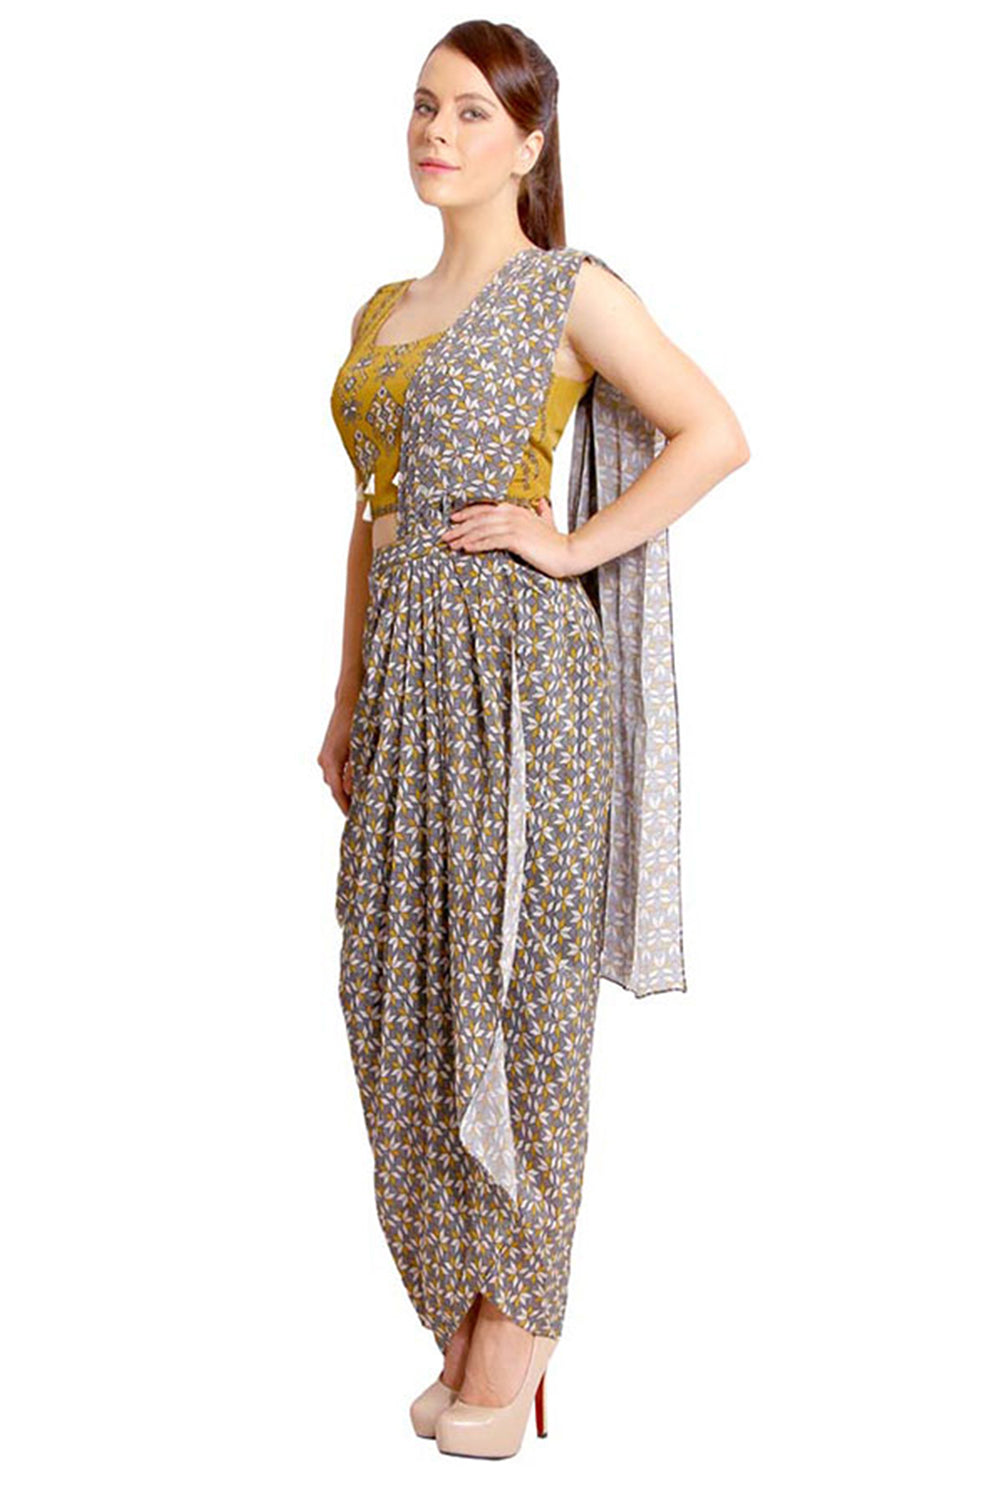 Bullion Flower Printed Pre-Stitched Saree With Top